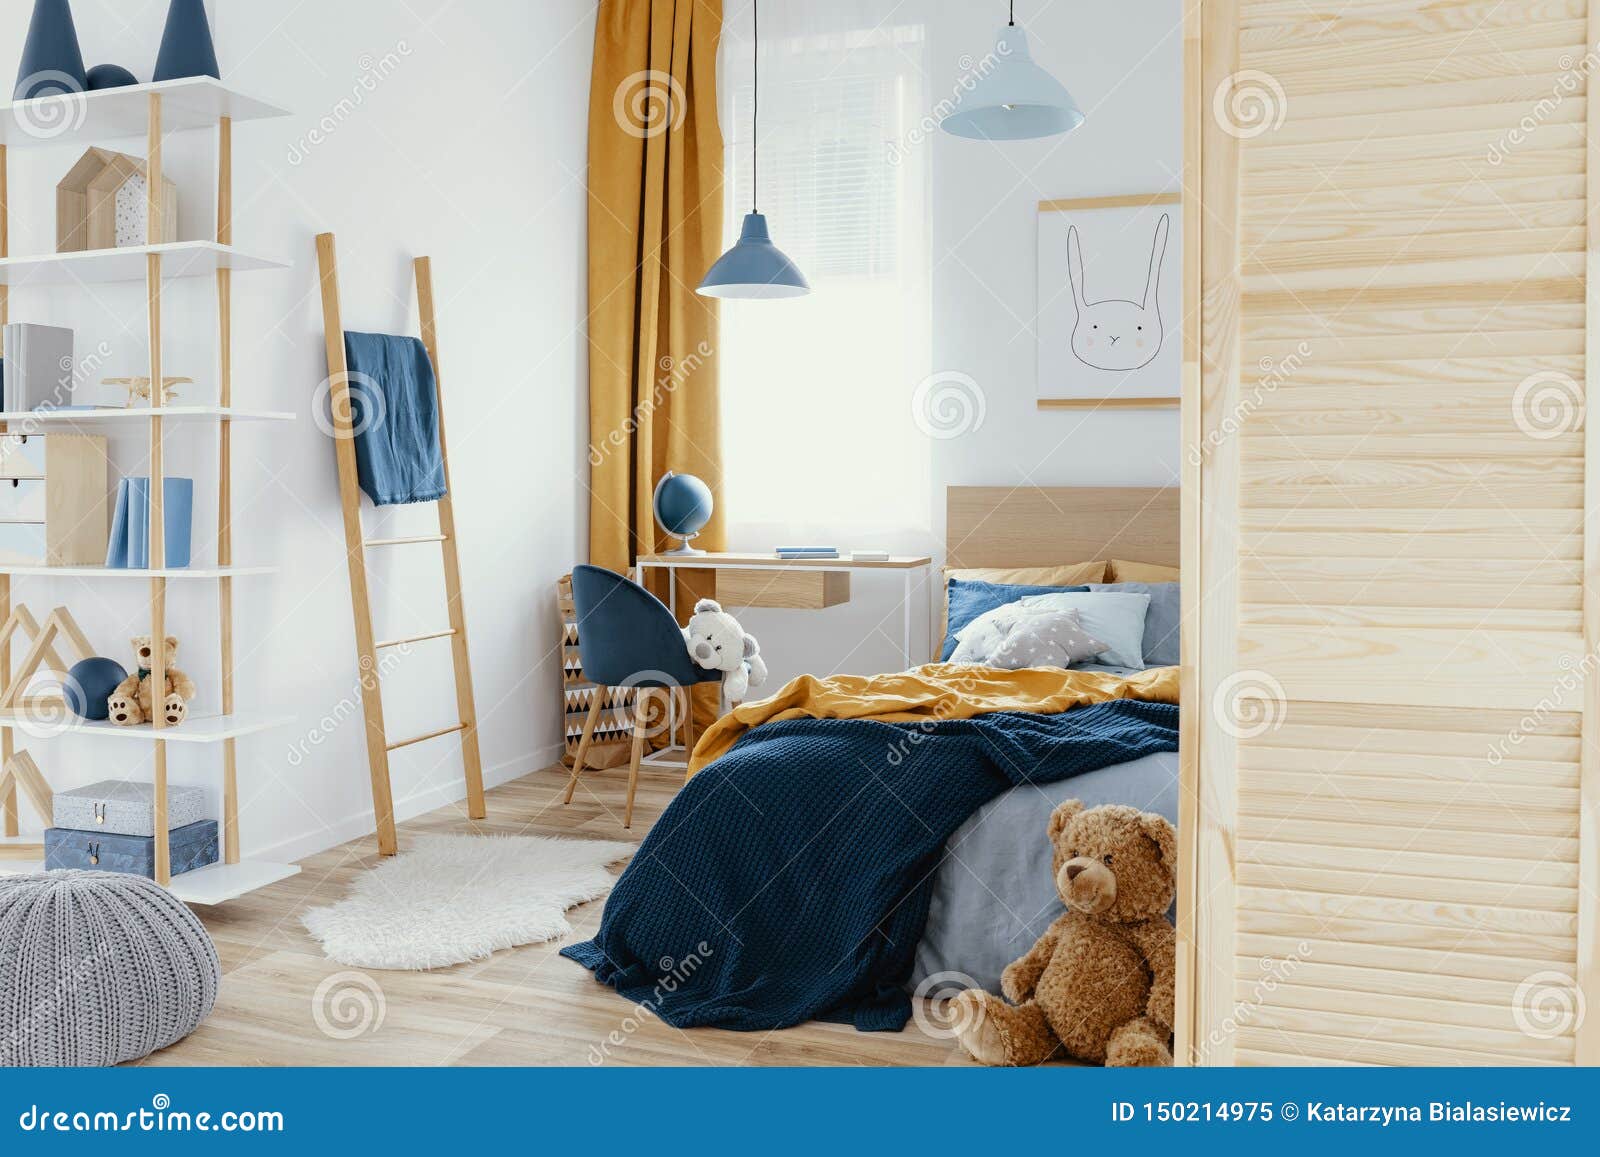 messy kid`s bedroom with toys and wooden furniture real photo